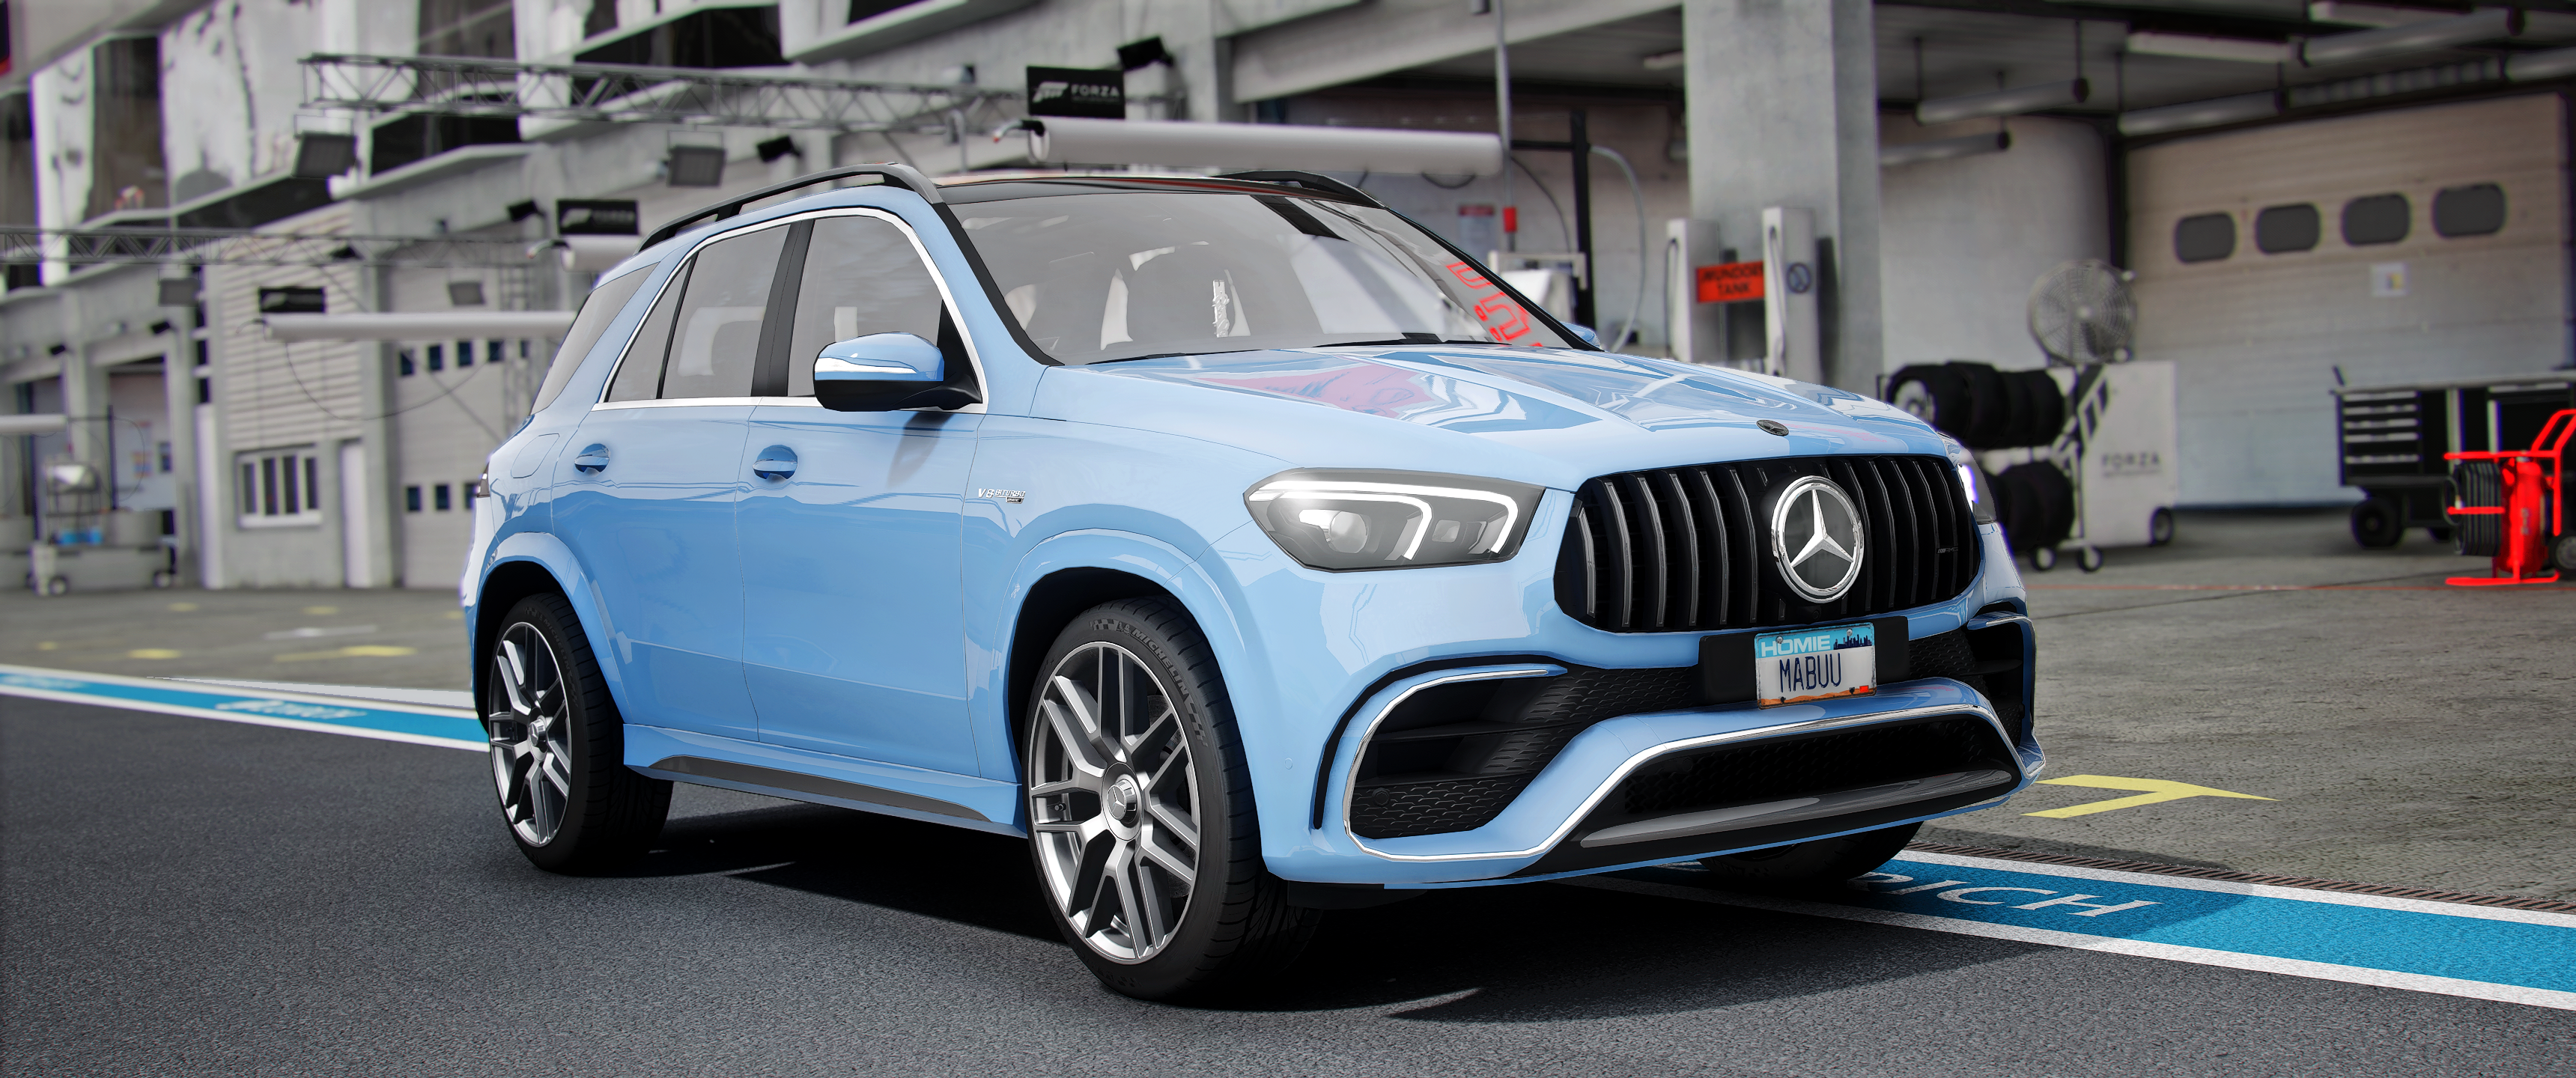 More information about "Mercedes Benz GLE 63 2021 | Gonzo"